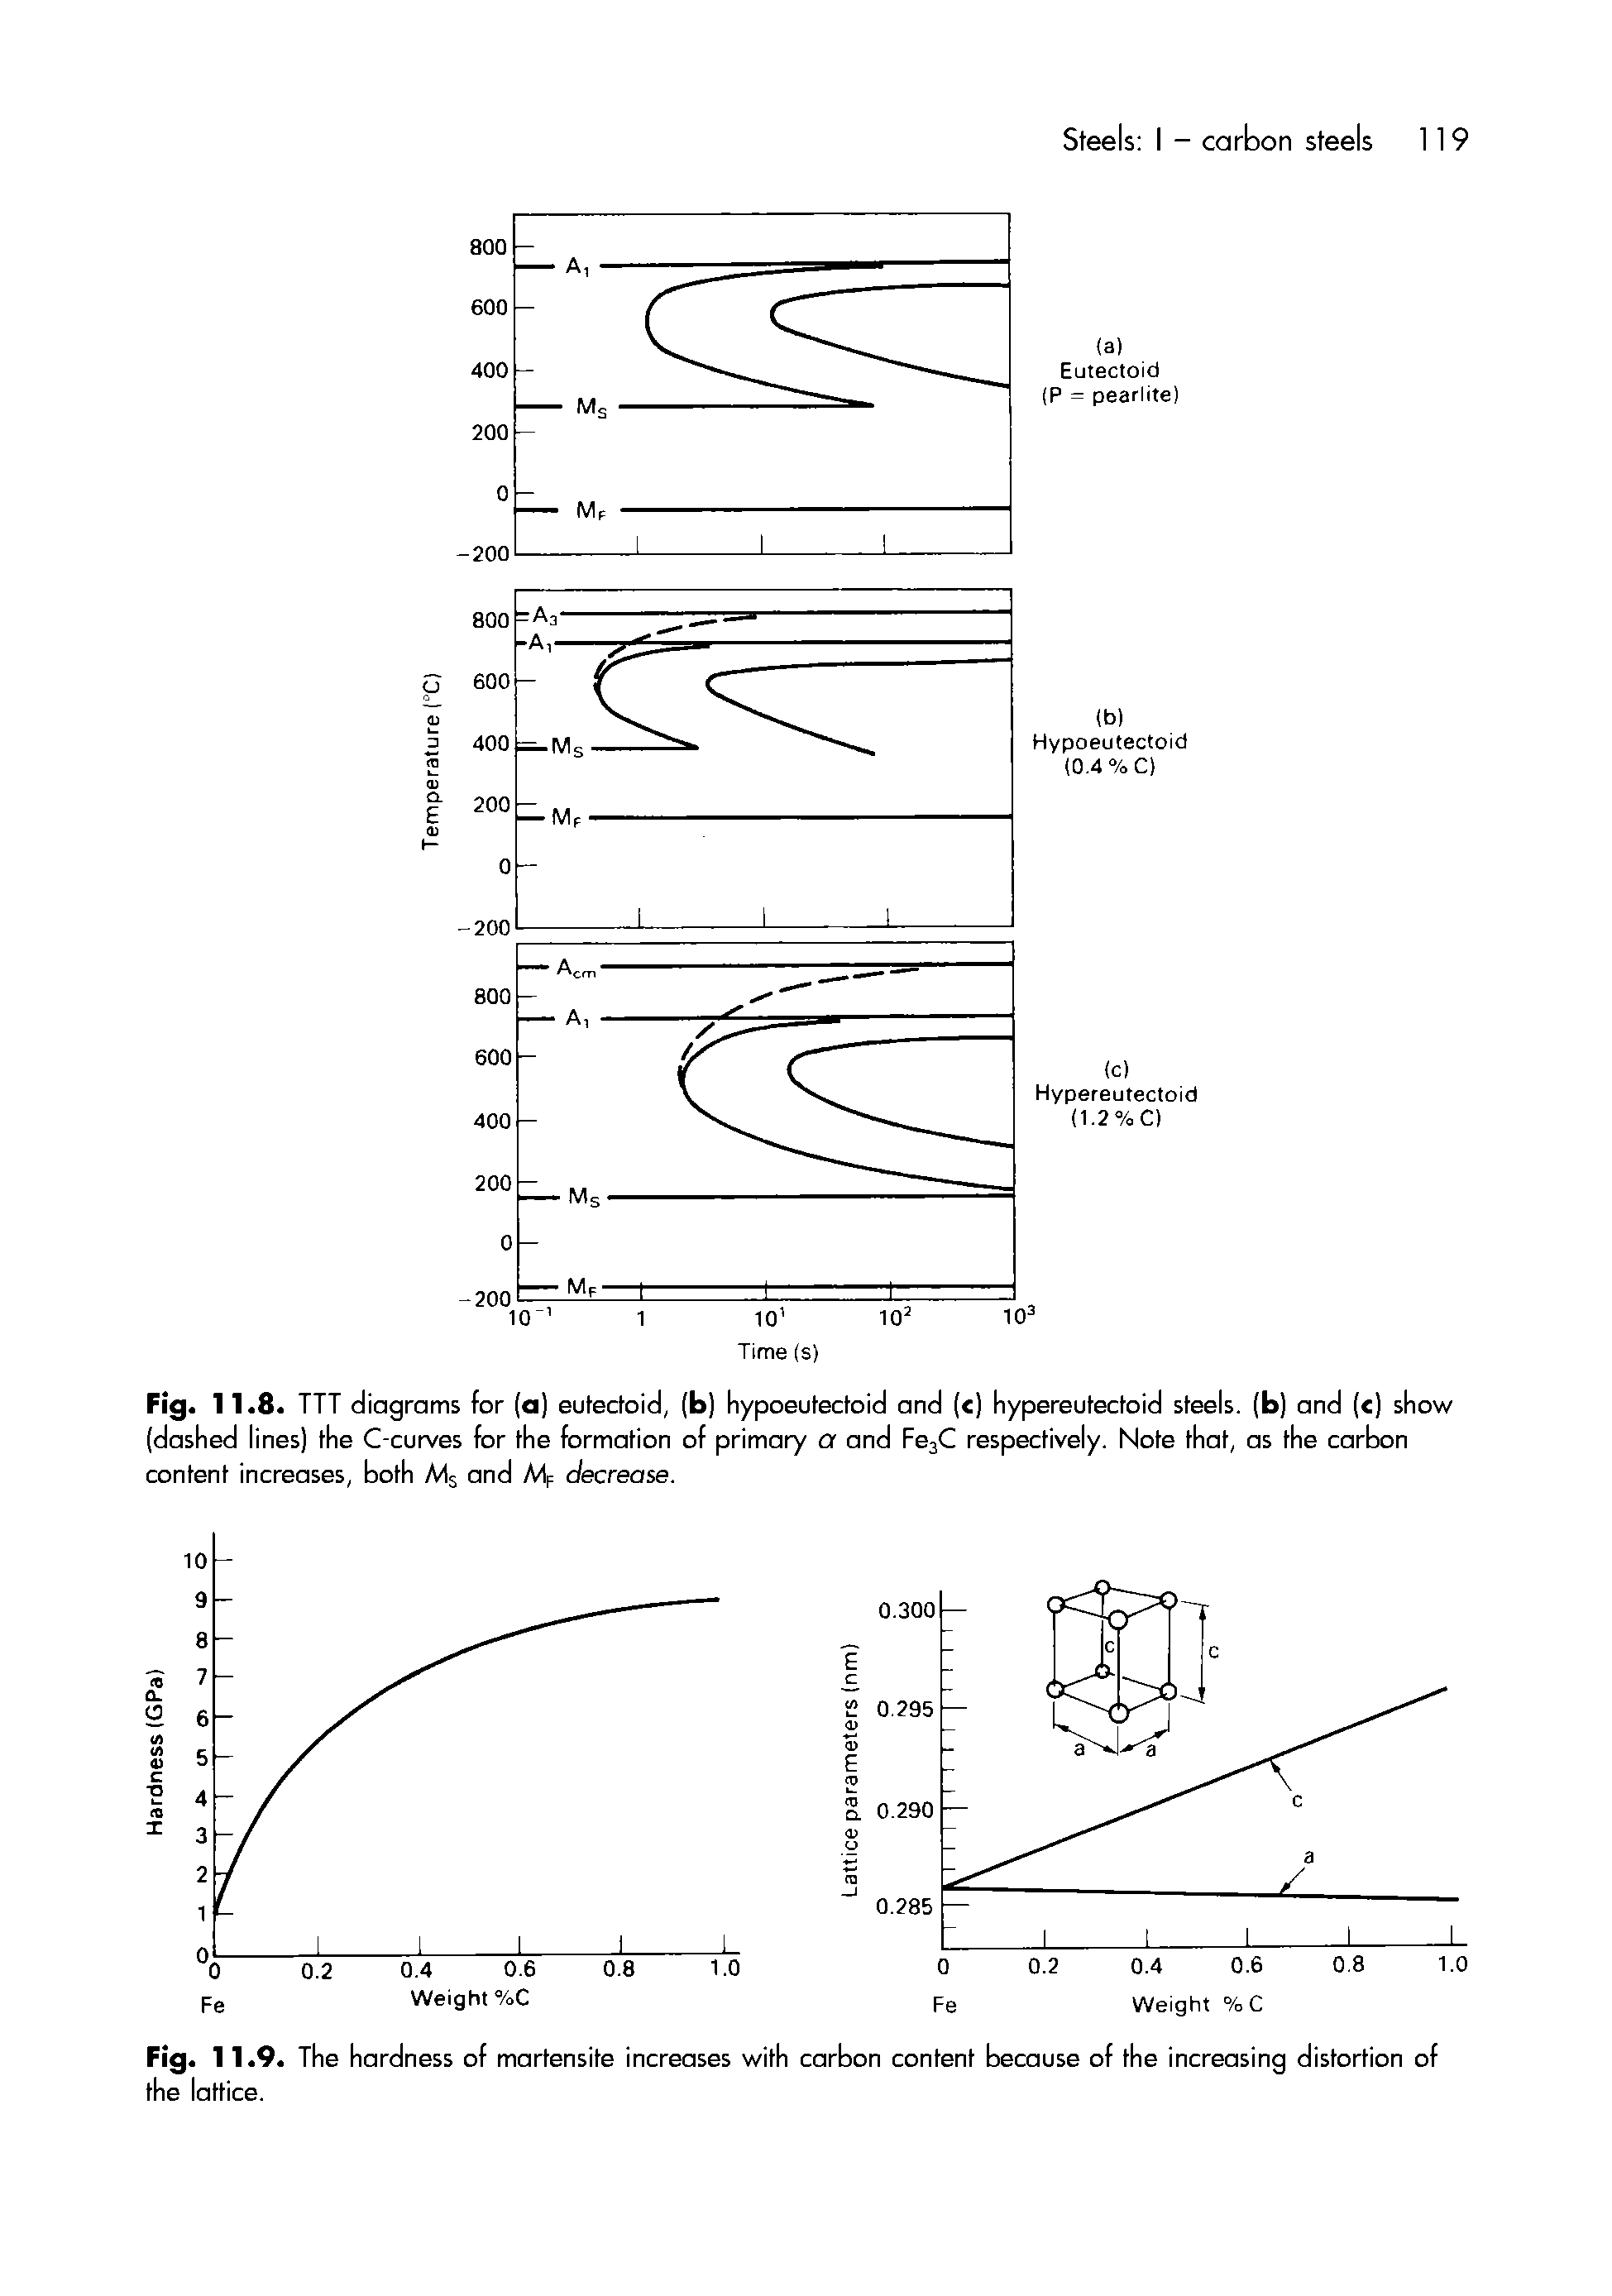 Fig. 11.8. TTT diagrams for (a) eutectoid, (b) hypoeutectoid and ( ) hypereutectoid steels, (b) and ( ) show (dashed lines) the C-curves for the formation of primary a and FejC respectively. Note that, os the carbon content increases, both A s and Mf decrease.